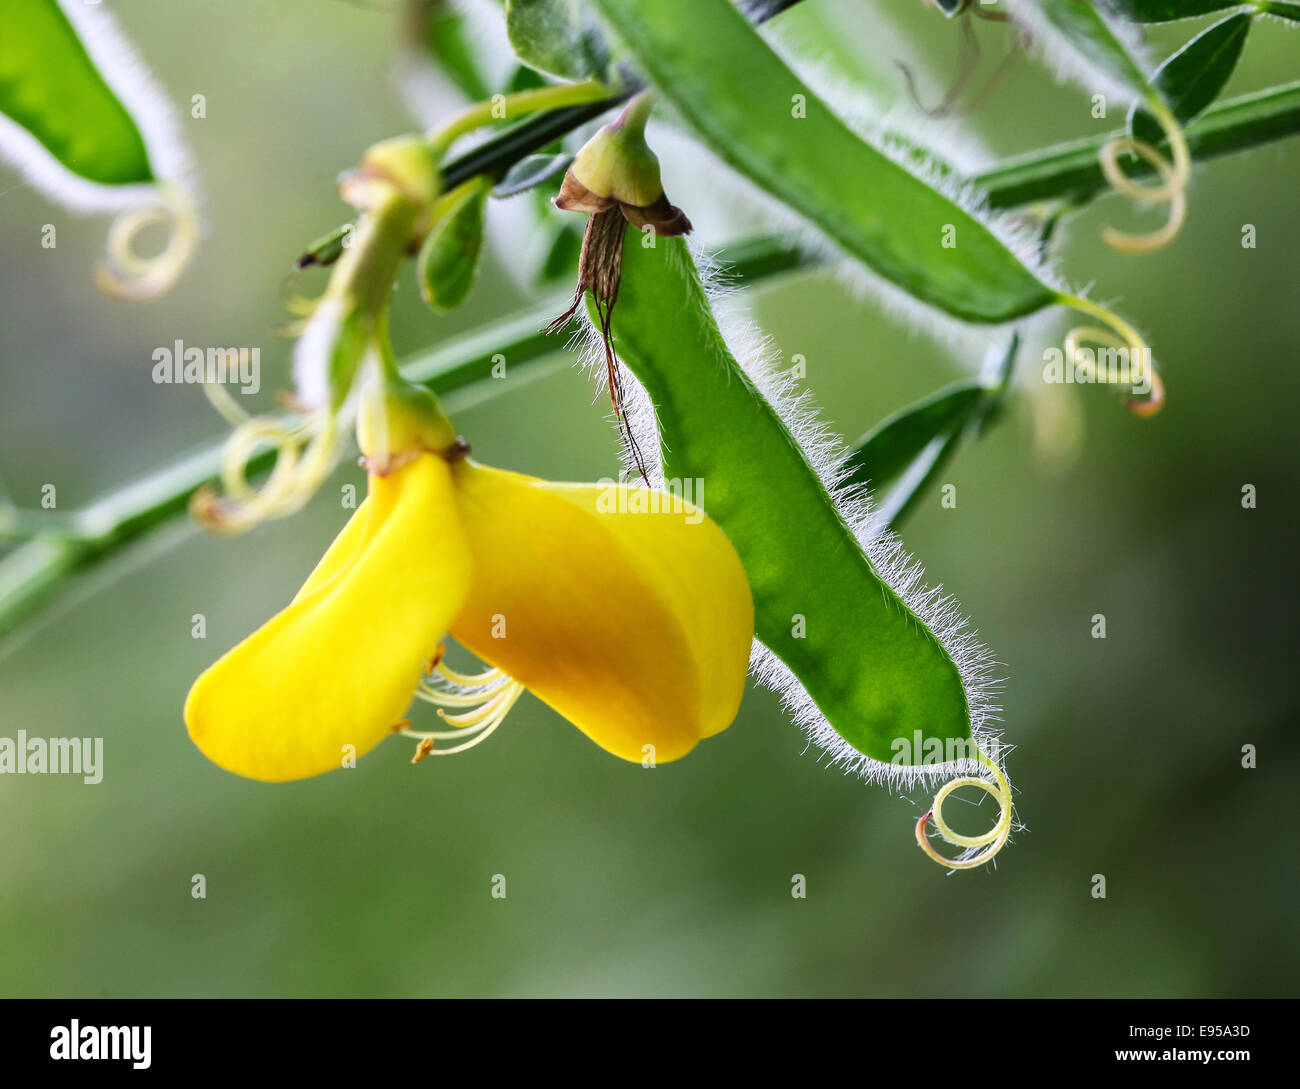 A close up shot of a Common Broom (Cytisus scoparius) single flower close-up of the yellow flowers and seed pods Stock Photo